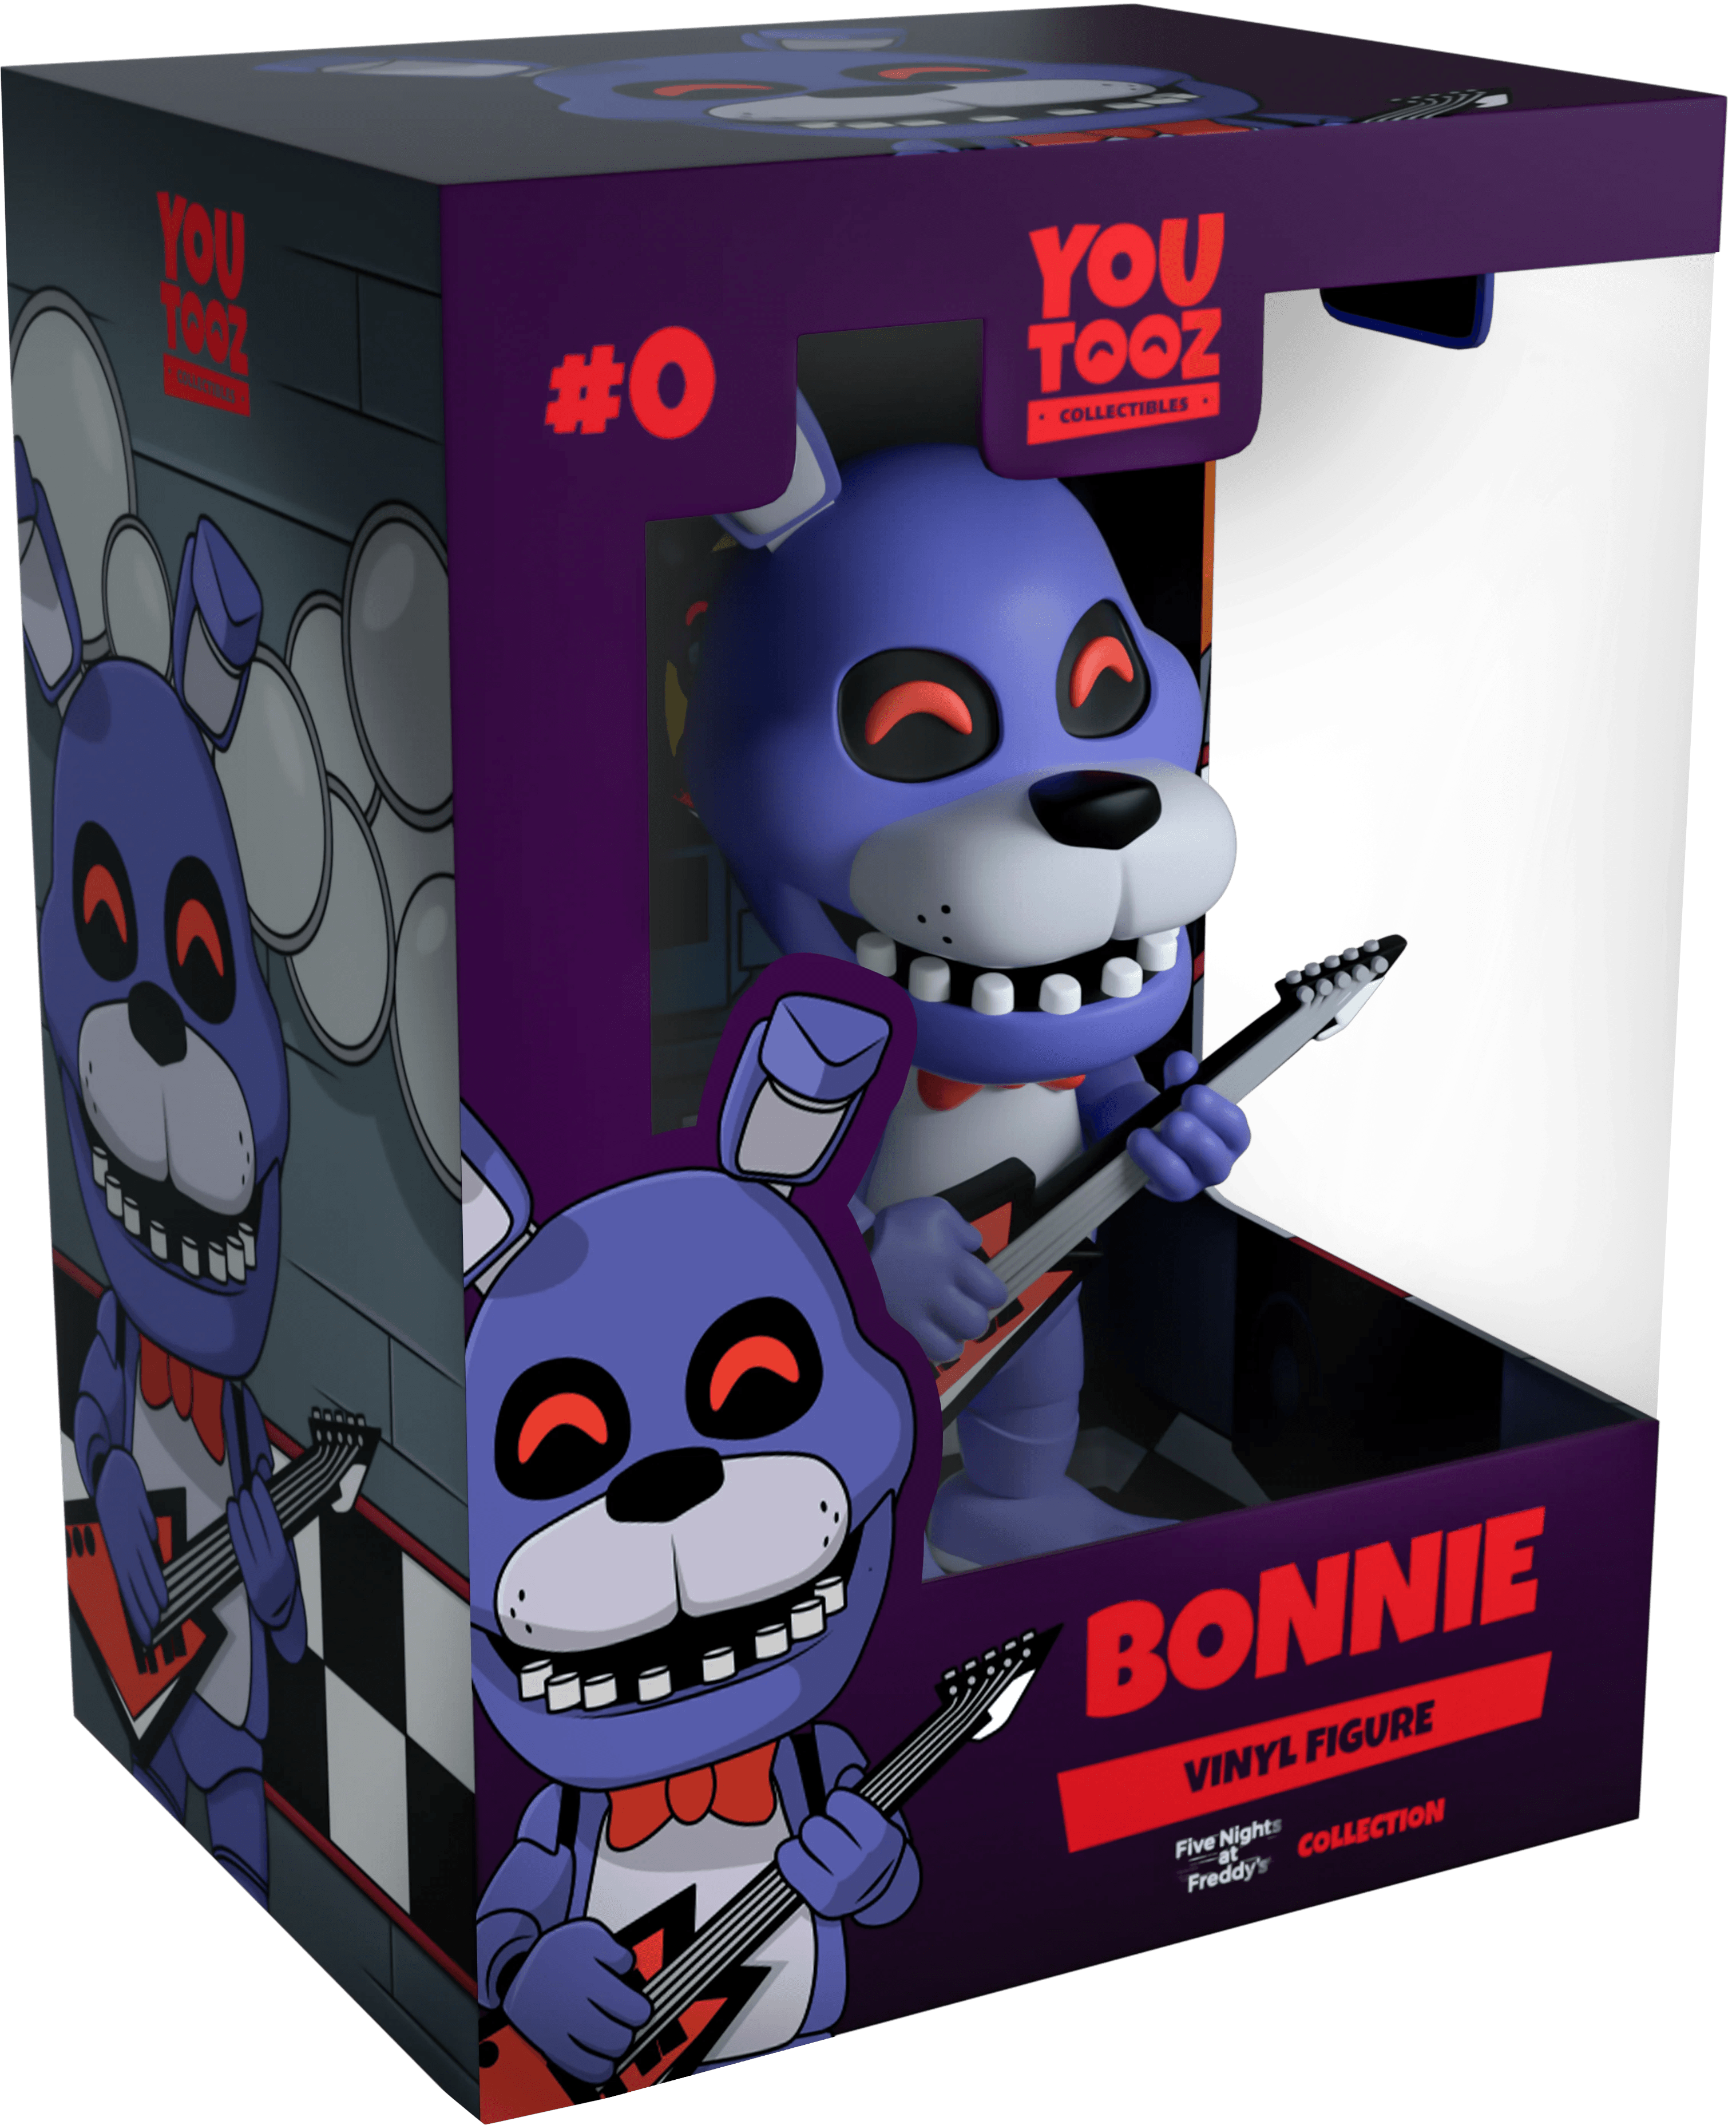 Youtooz - Five Nights at Freddy’s - Bonnie Vinyl Figure #0 - The Card Vault